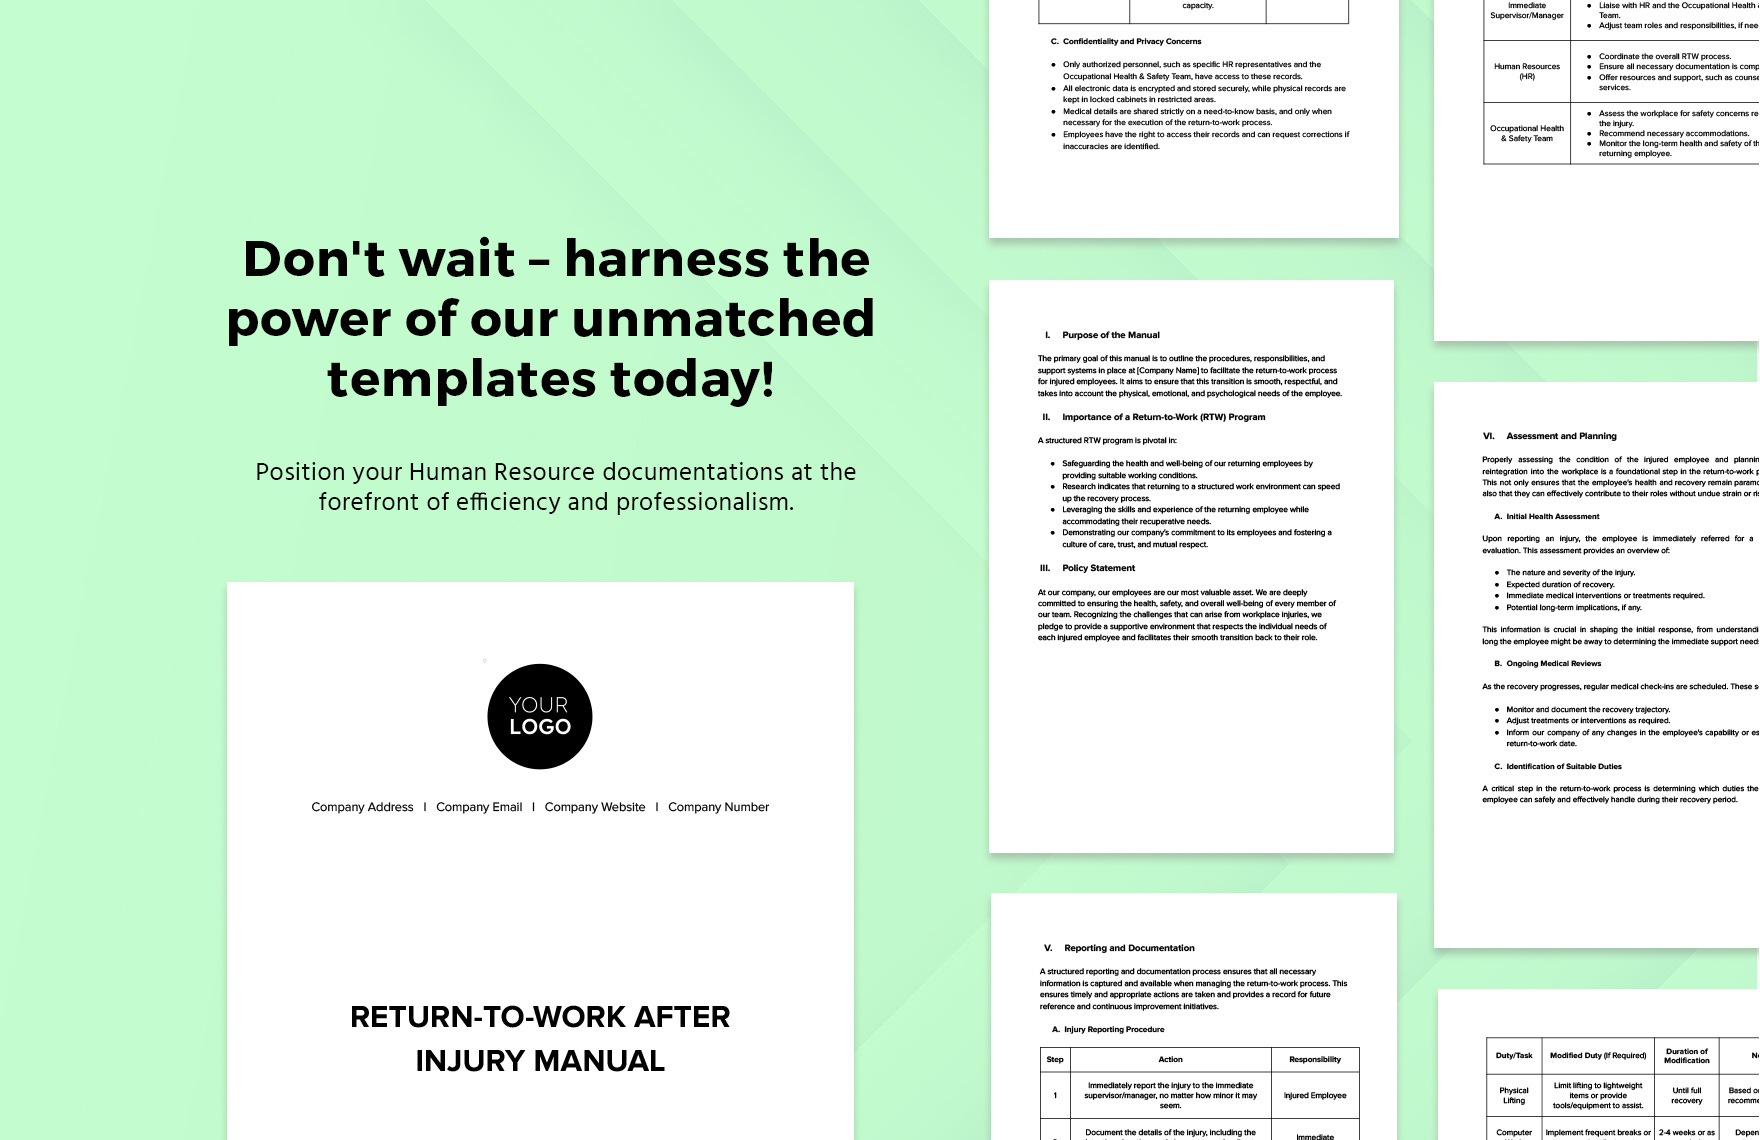 Return-to-Work After Injury Manual HR Template